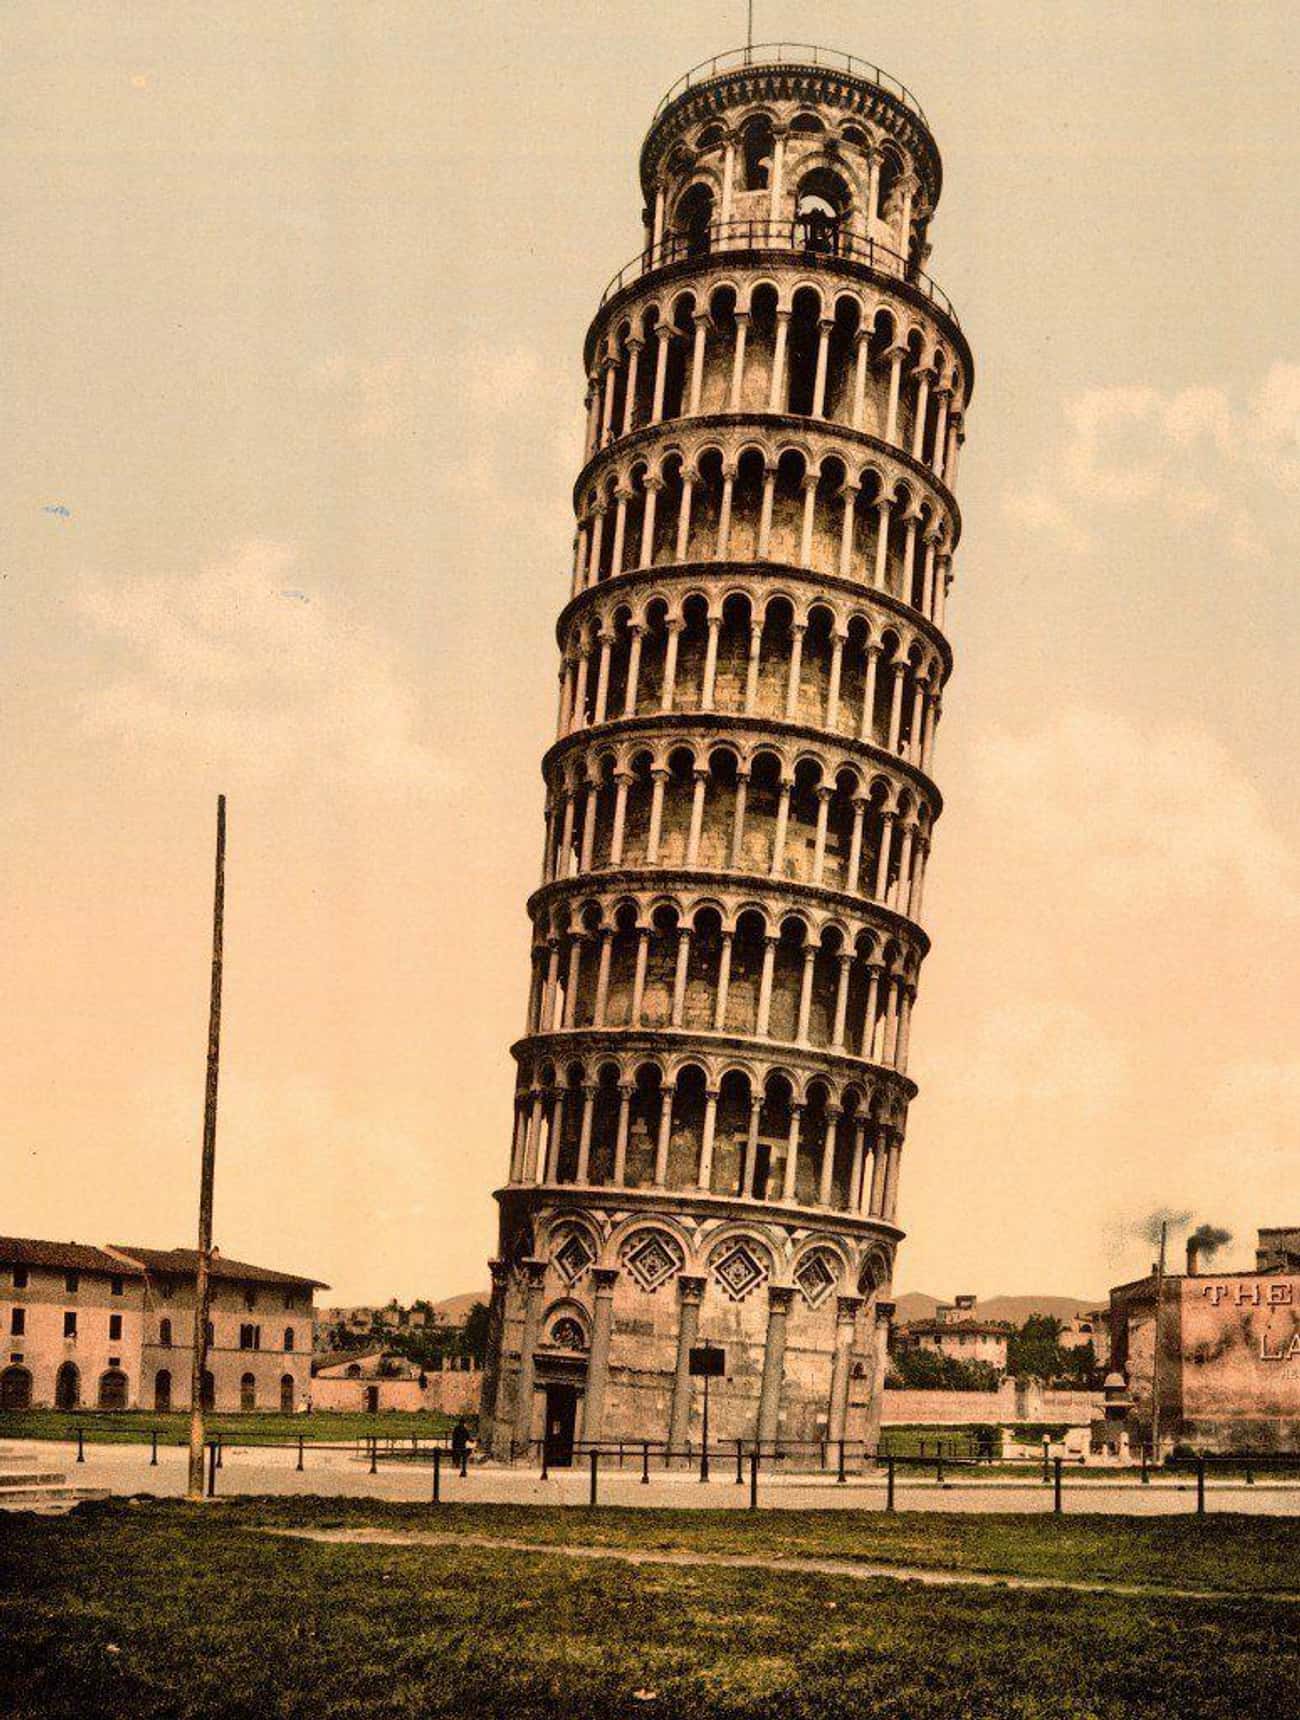 Has The Leaning Tower Of Pisa Ever Been Straight?